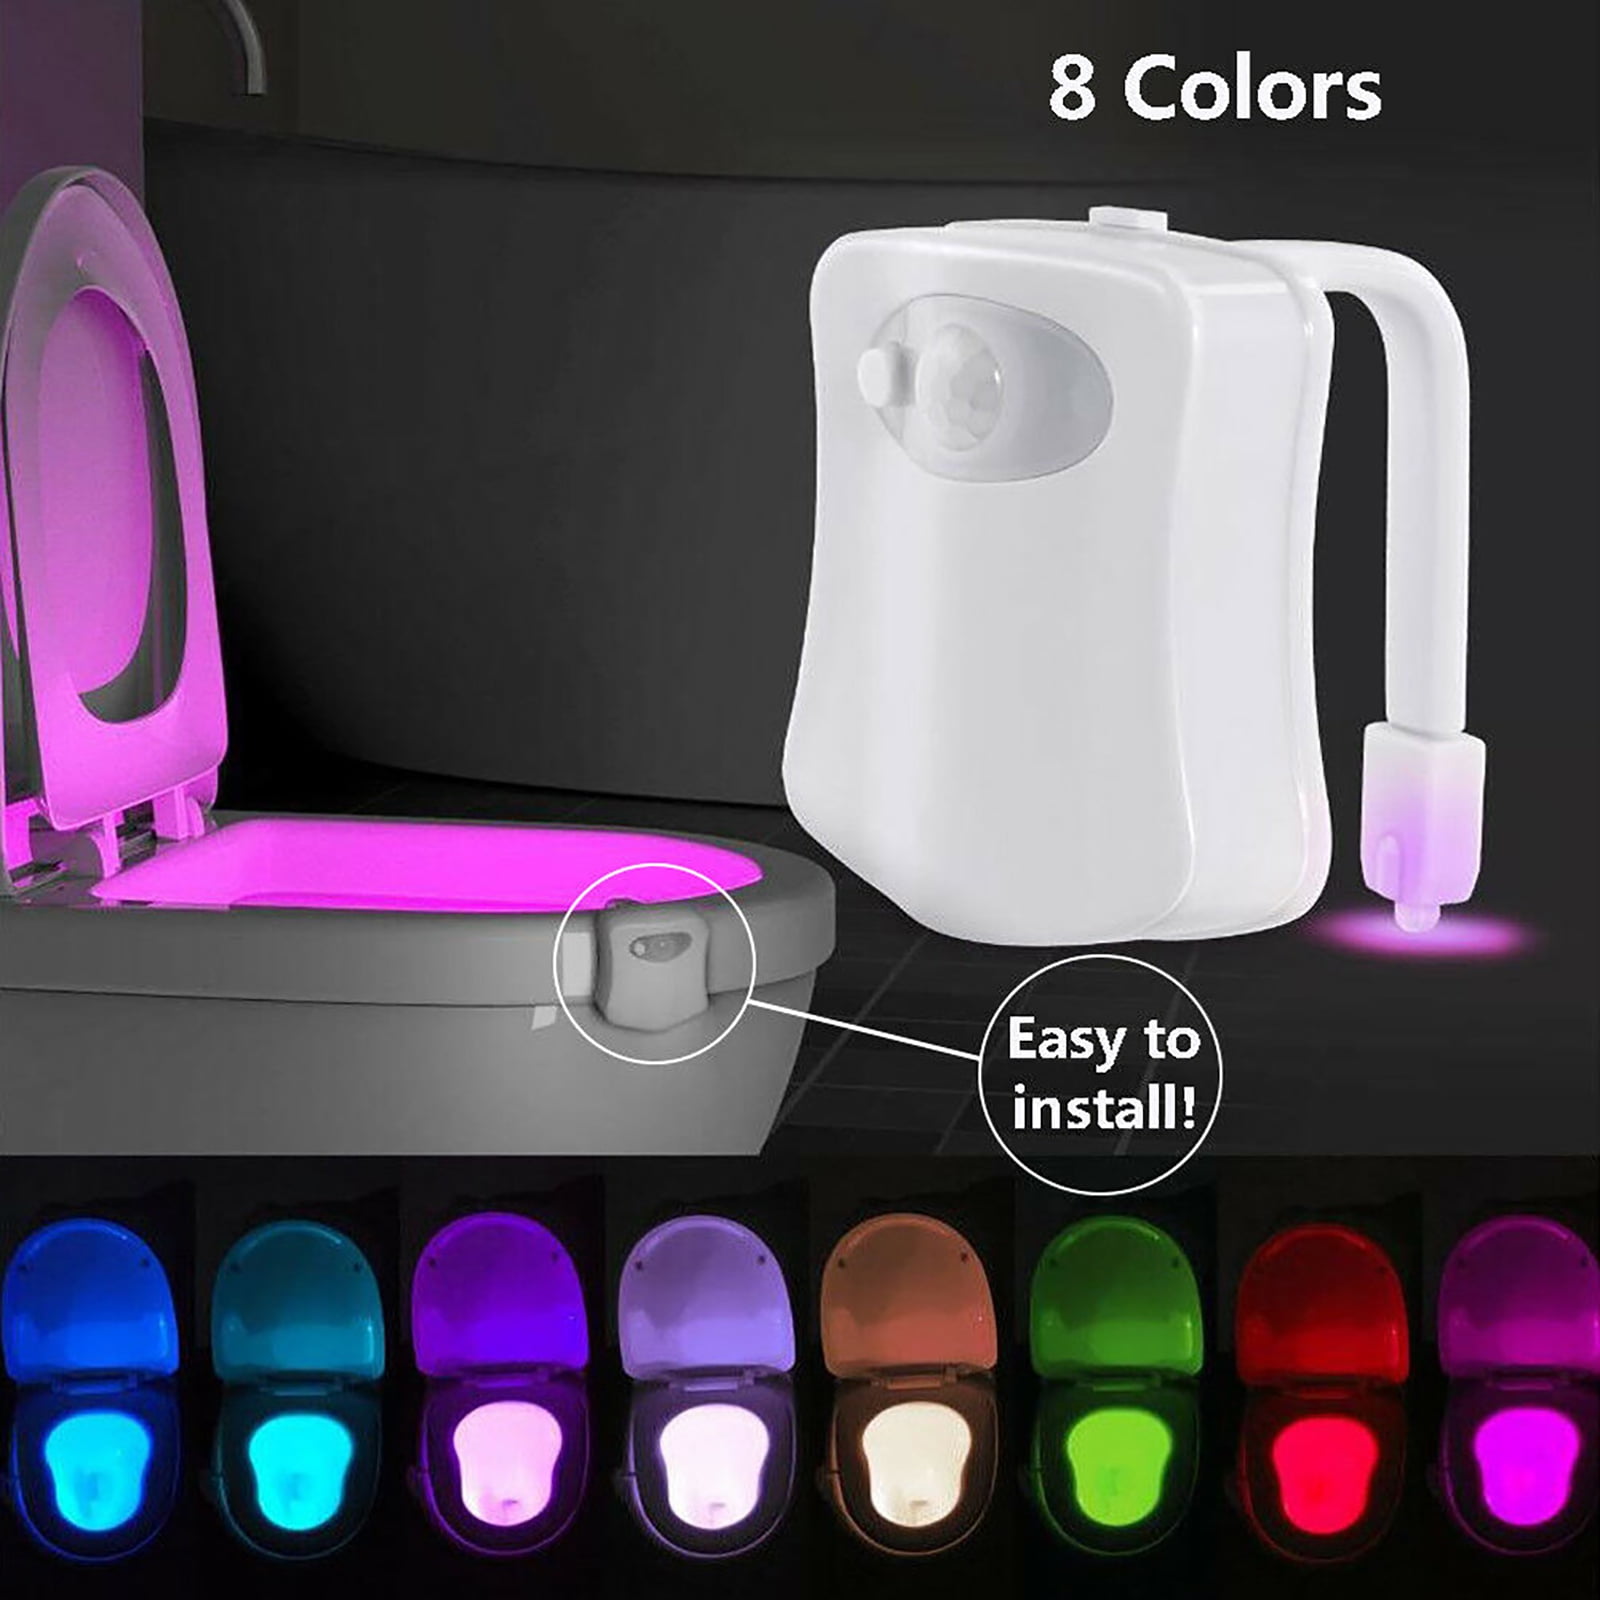 16-Color Toilet Night Light, Motion Activated Detection Bathroom Bowl  Lights, Unique & Funny Birthday Gifts Idea for Dad Teen Boy Kids Men Women,  Cool Fun Gadgets Gag Stocking Stuffers 